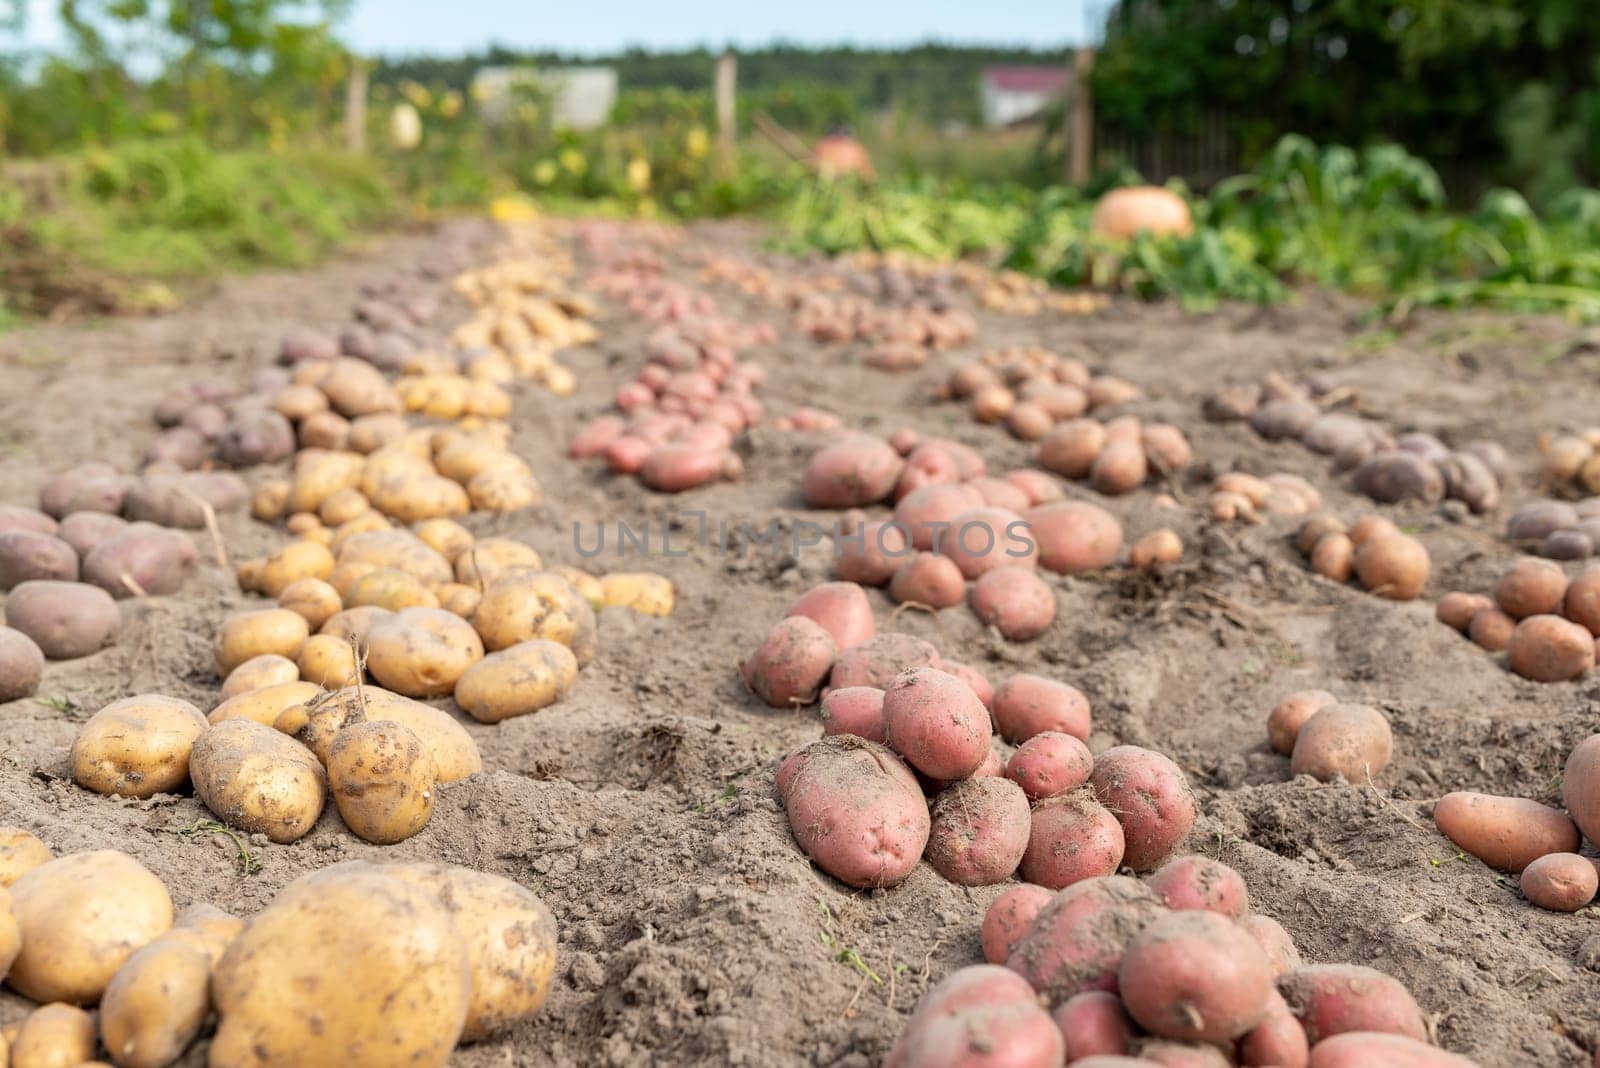 Dug potato of different color and sort in rows in garden by VitaliiPetrushenko